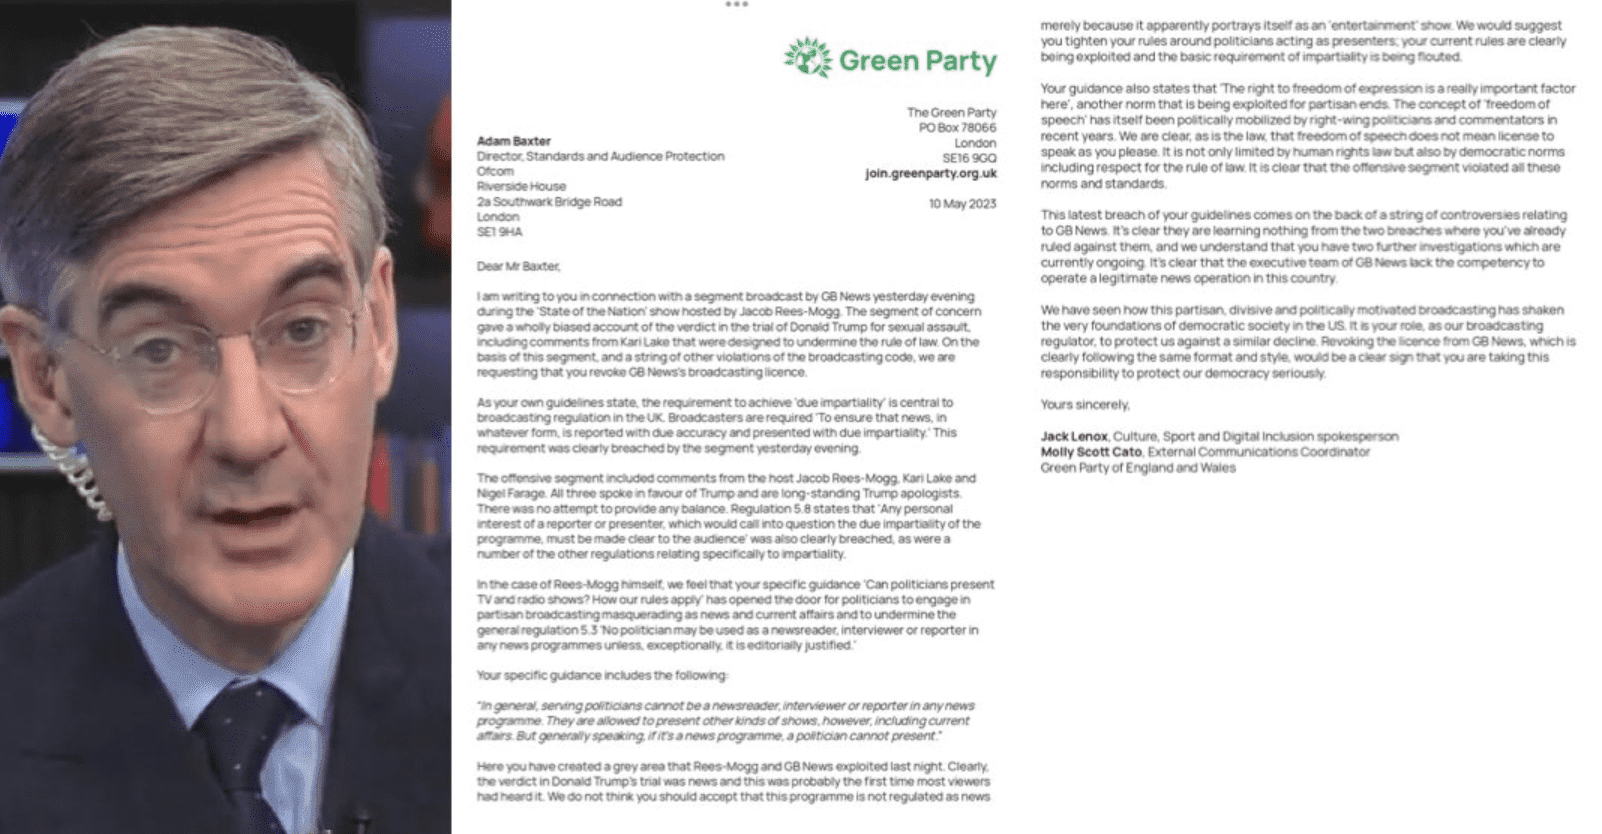 Two Prominent Politicians From The Green Party, Molly Scott Cato And Jack Lenox, Have Written A Strongly-worded Letter To Ofcom, The Uk’s Media Regulator, Demanding The Revocation Of Gb News’ Broadcasting License